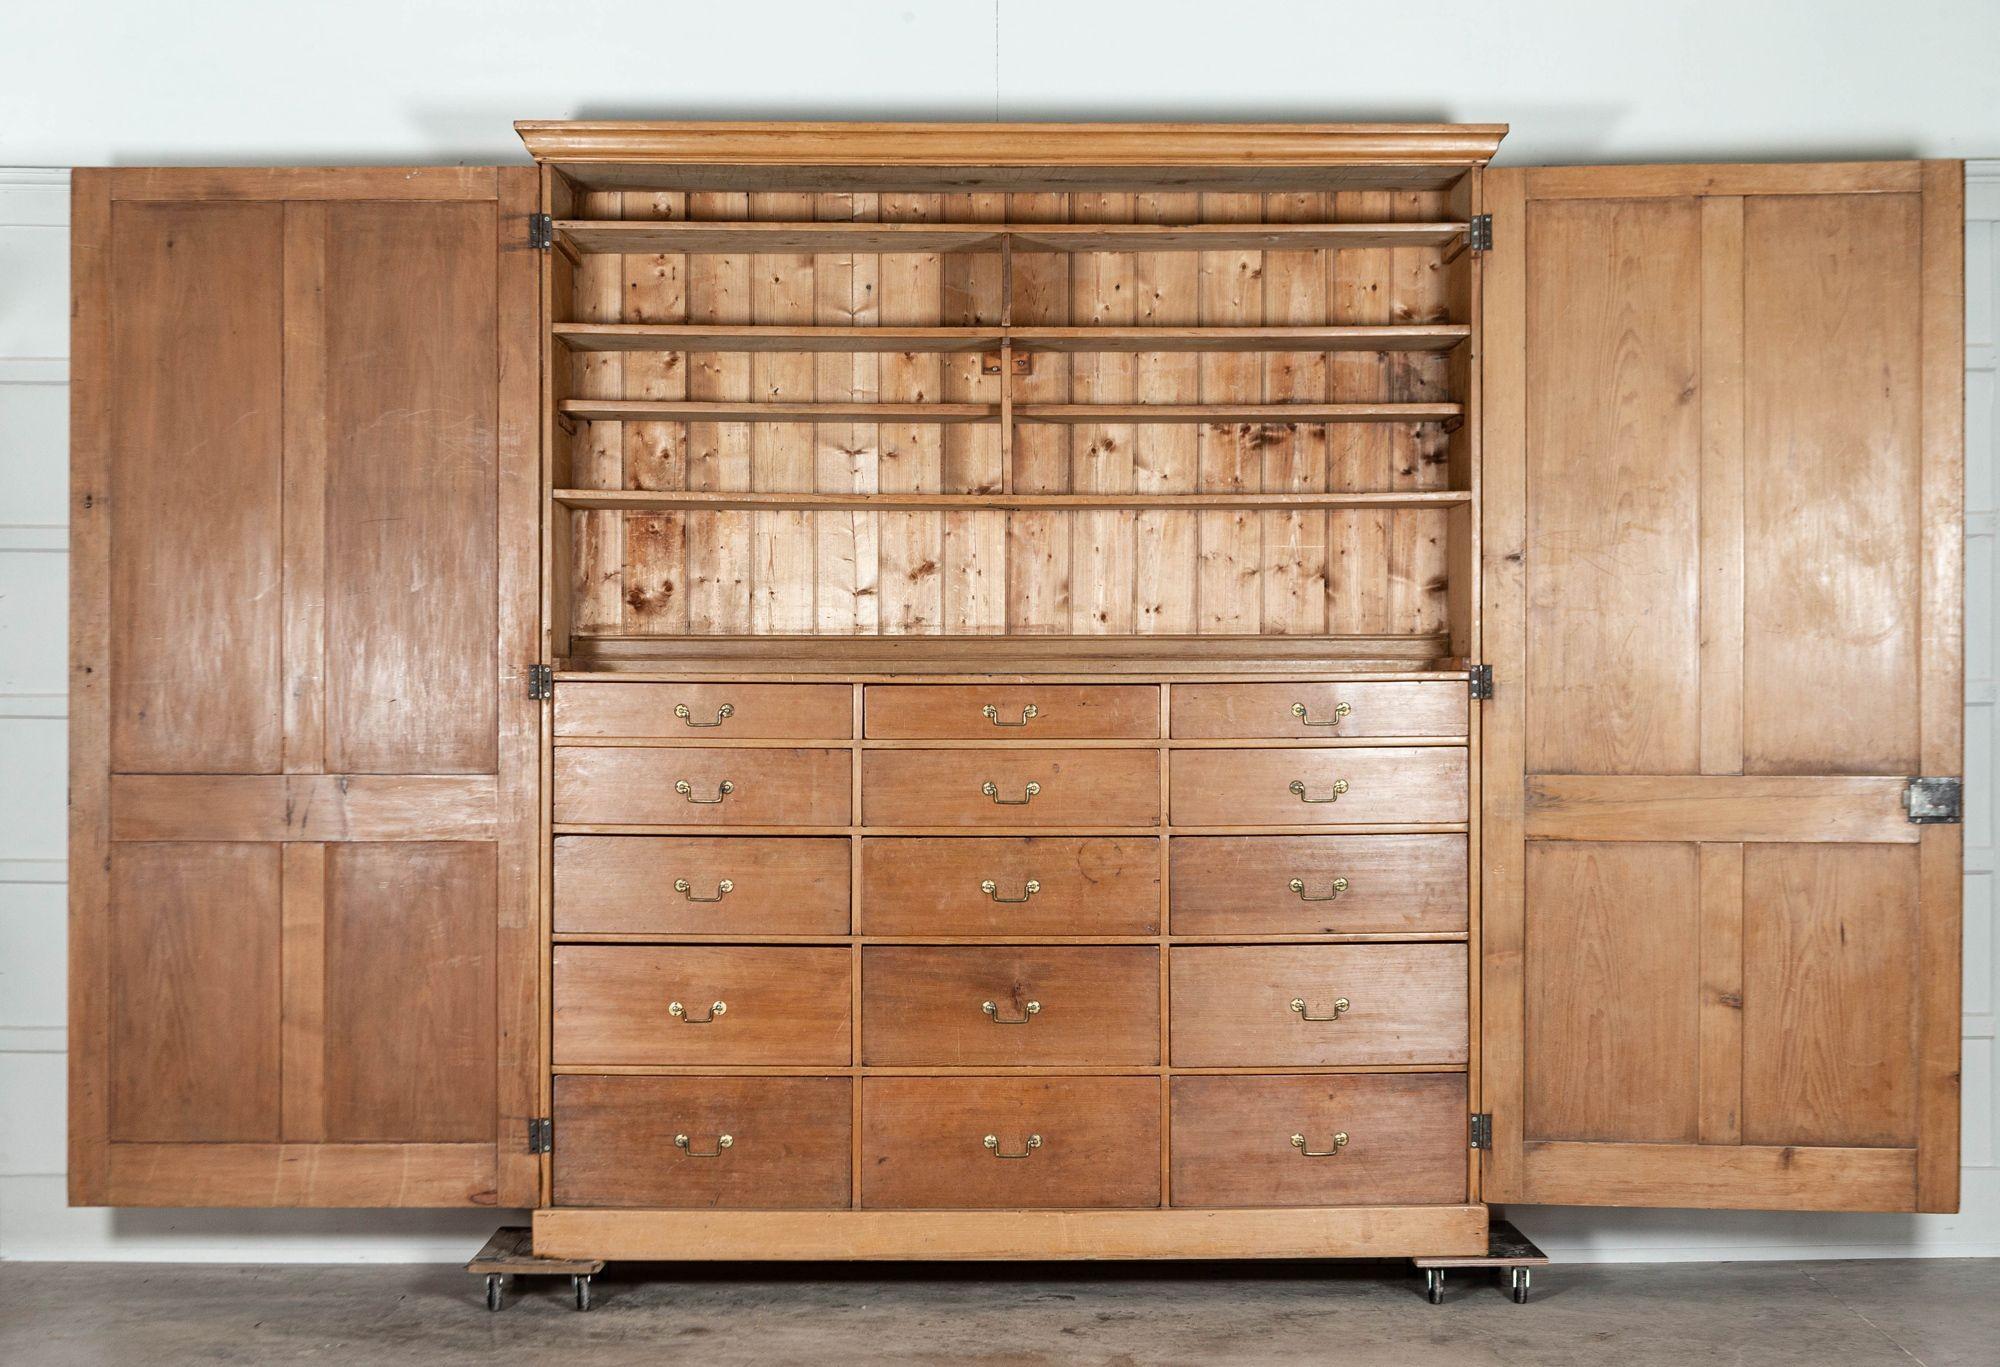 circa 1870
Large 19th century English Pine Linen Press Chest with Graduated Internal Drawers
Breaks down into base, top and doors
sku 1448
Together W224 x D54 x H256 cm
Base W217 x D51 x H133 cm
Top W224 x D54 x H123 cm